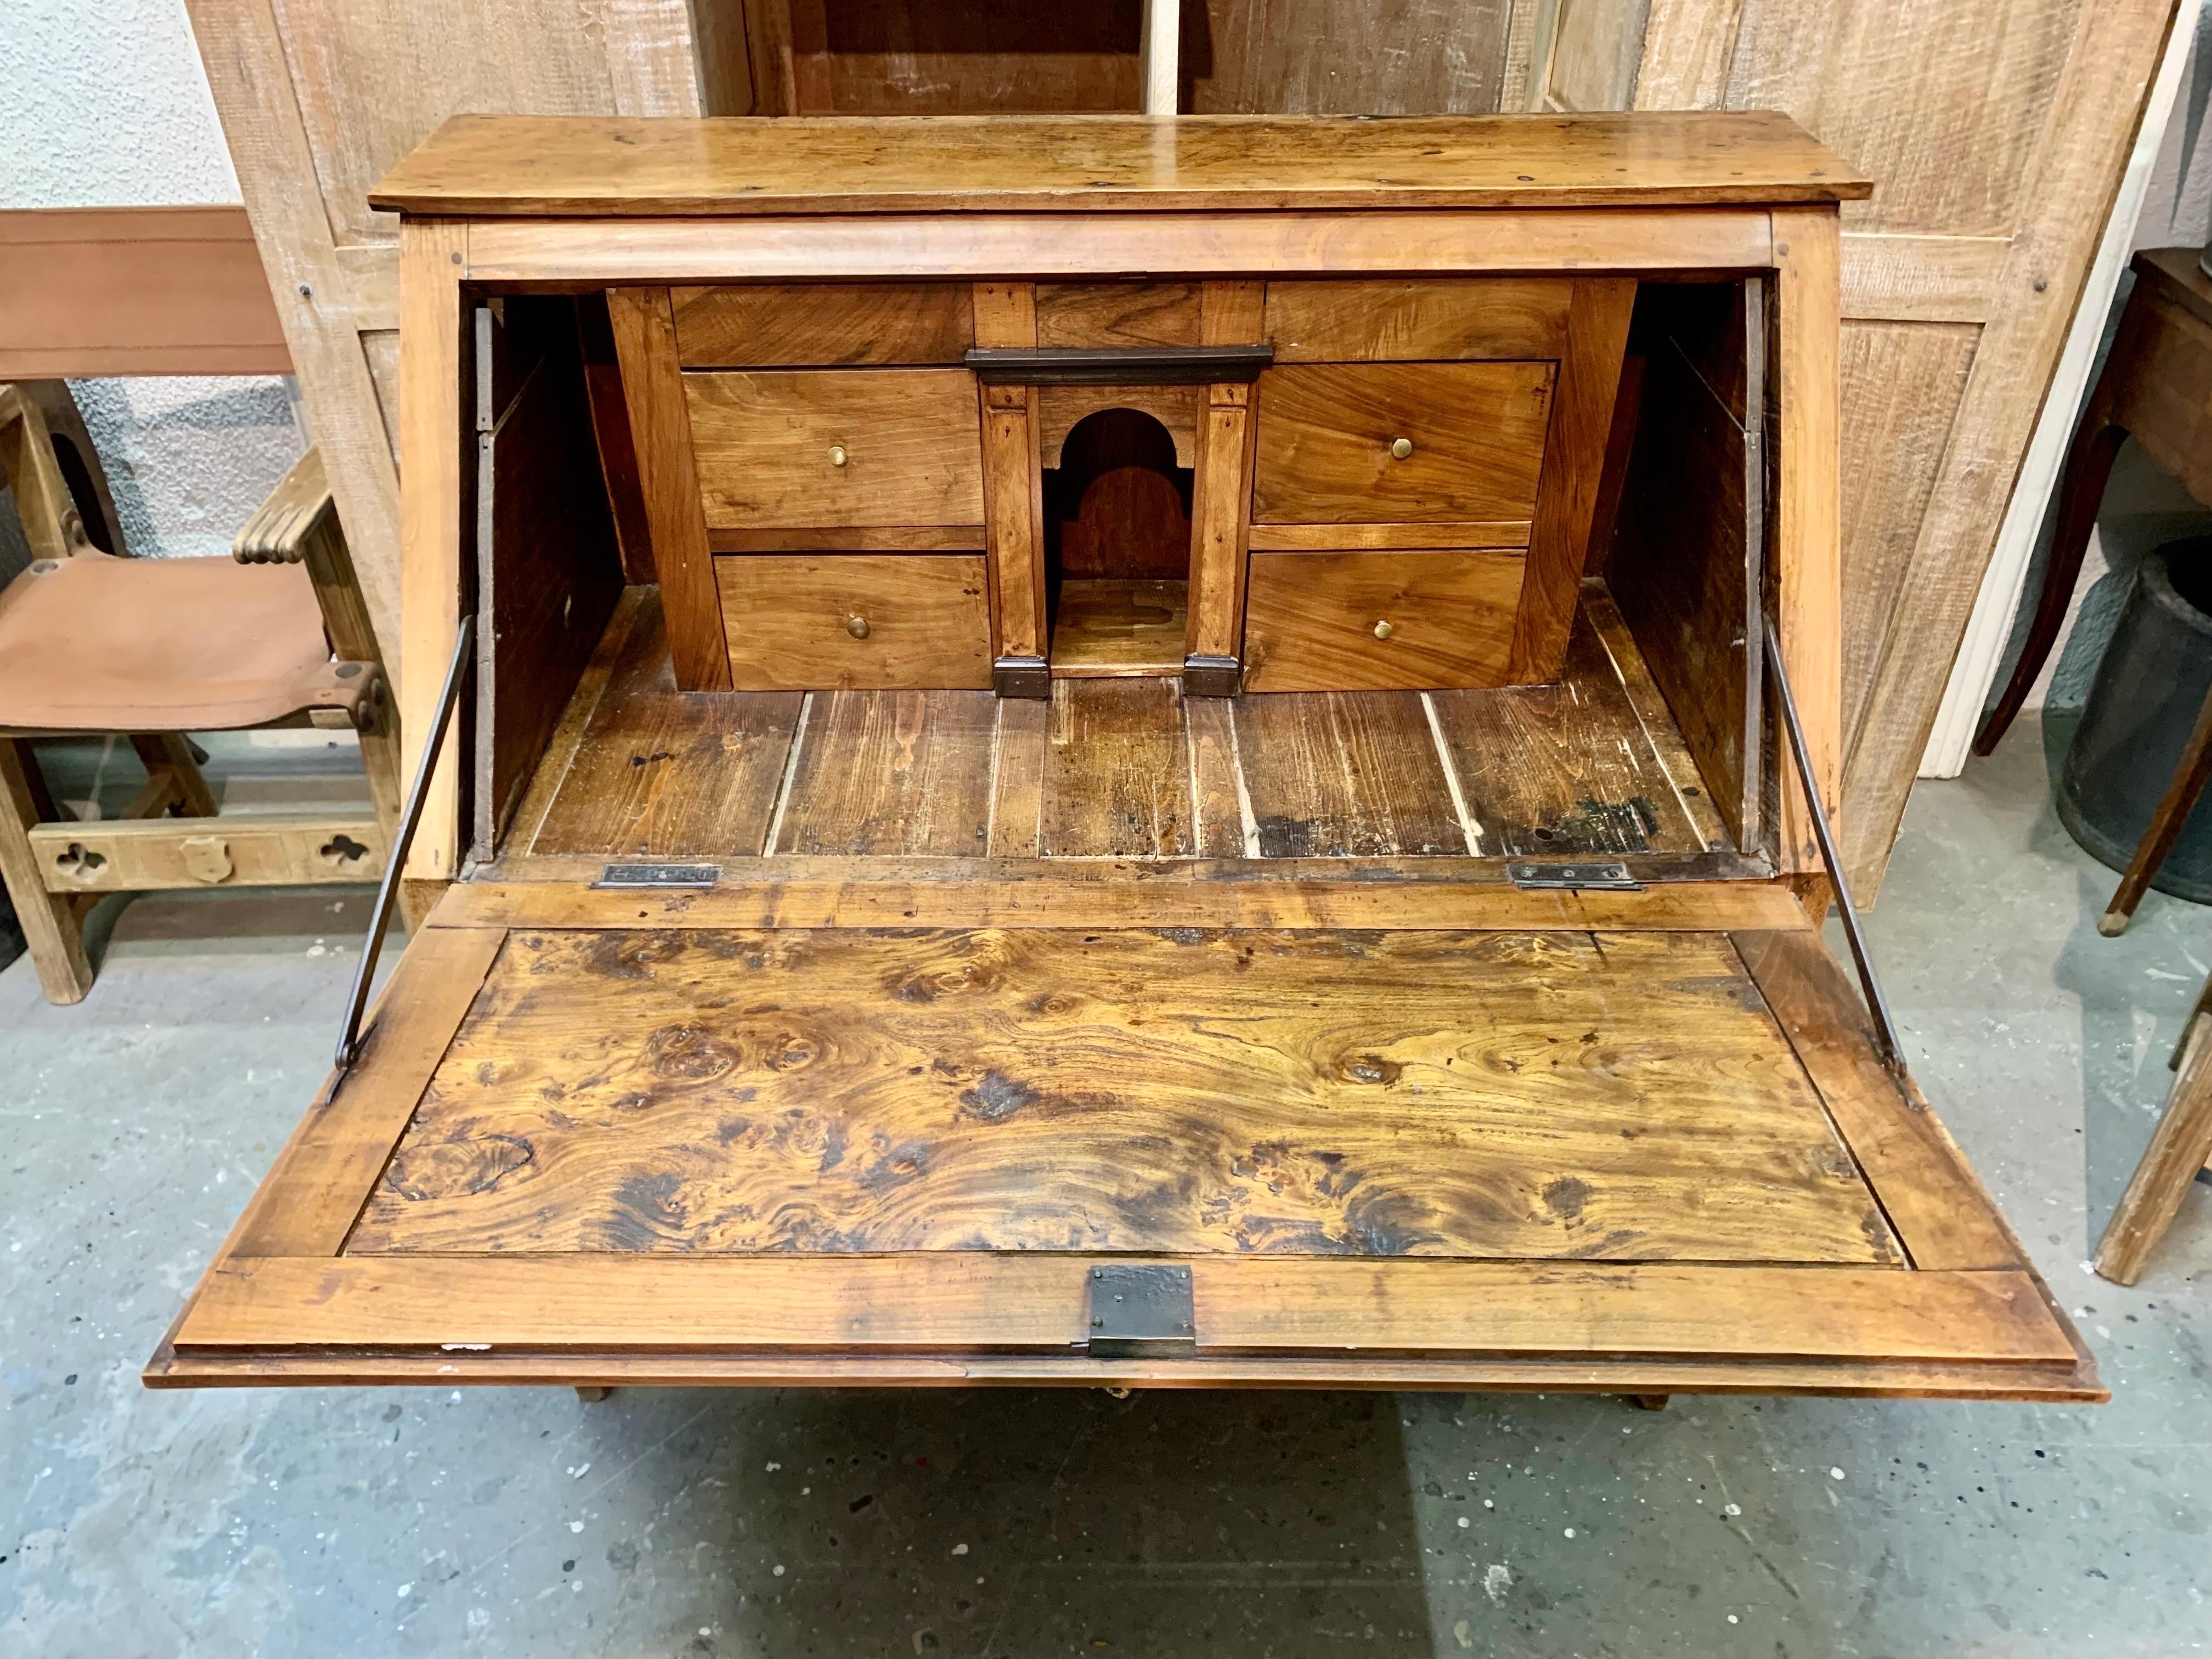 A French Directory era secretary desk, from the early 19th century, made of beautiful cherry wood, in a light tone with bronze handles and bronze keyholes as well. In their lower part they have a long drawer, and two smaller upper ones. When opening